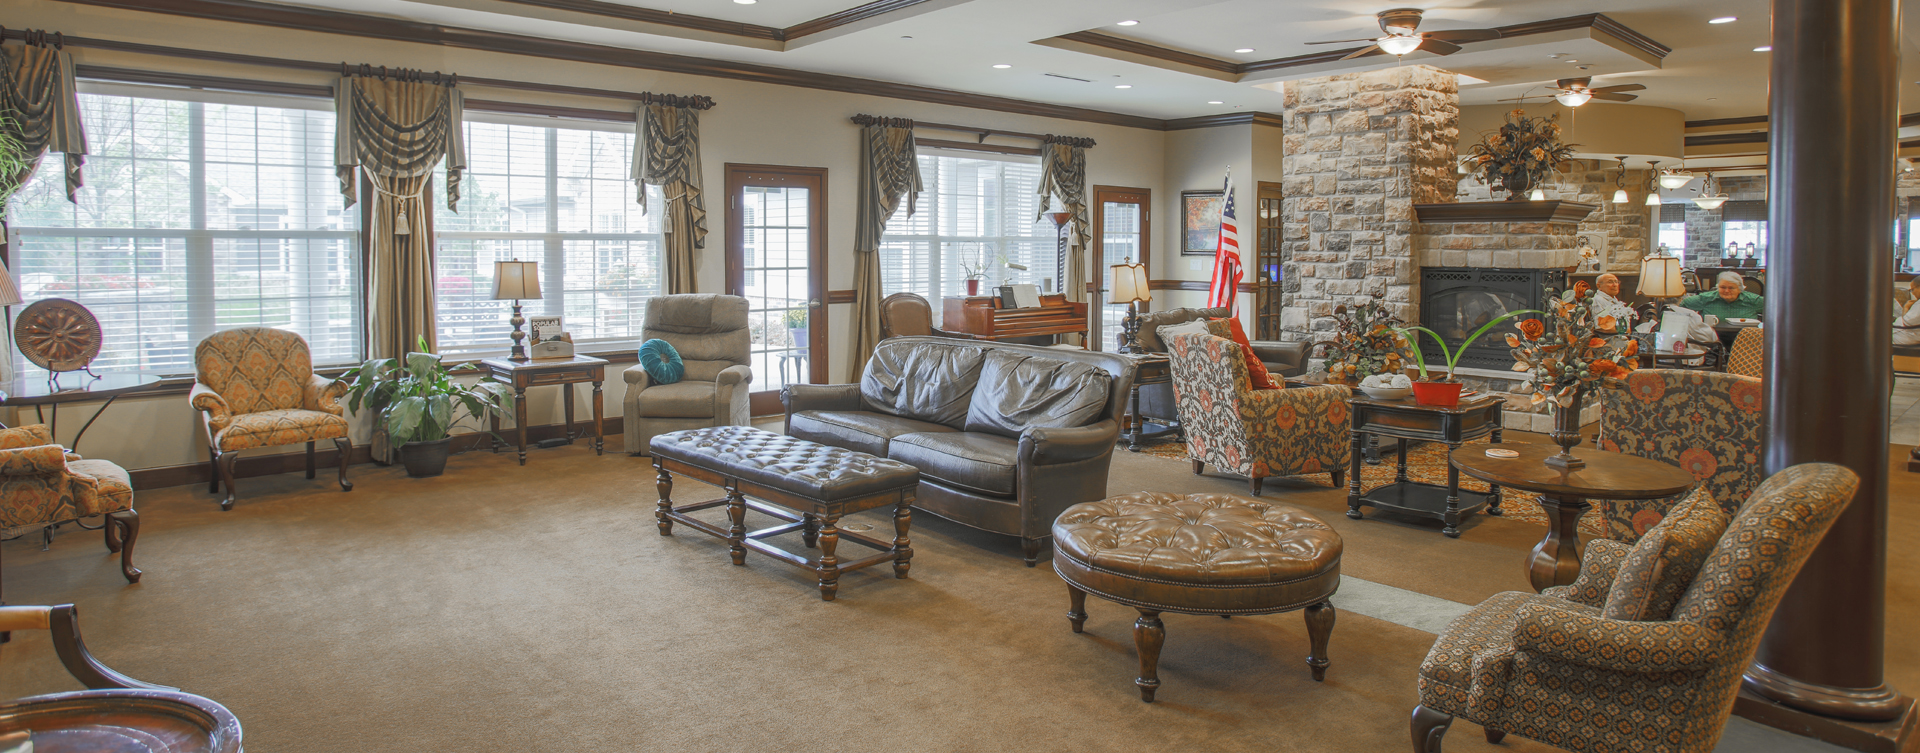 Snooze in your favorite chair in the living room at Bickford of Carmel